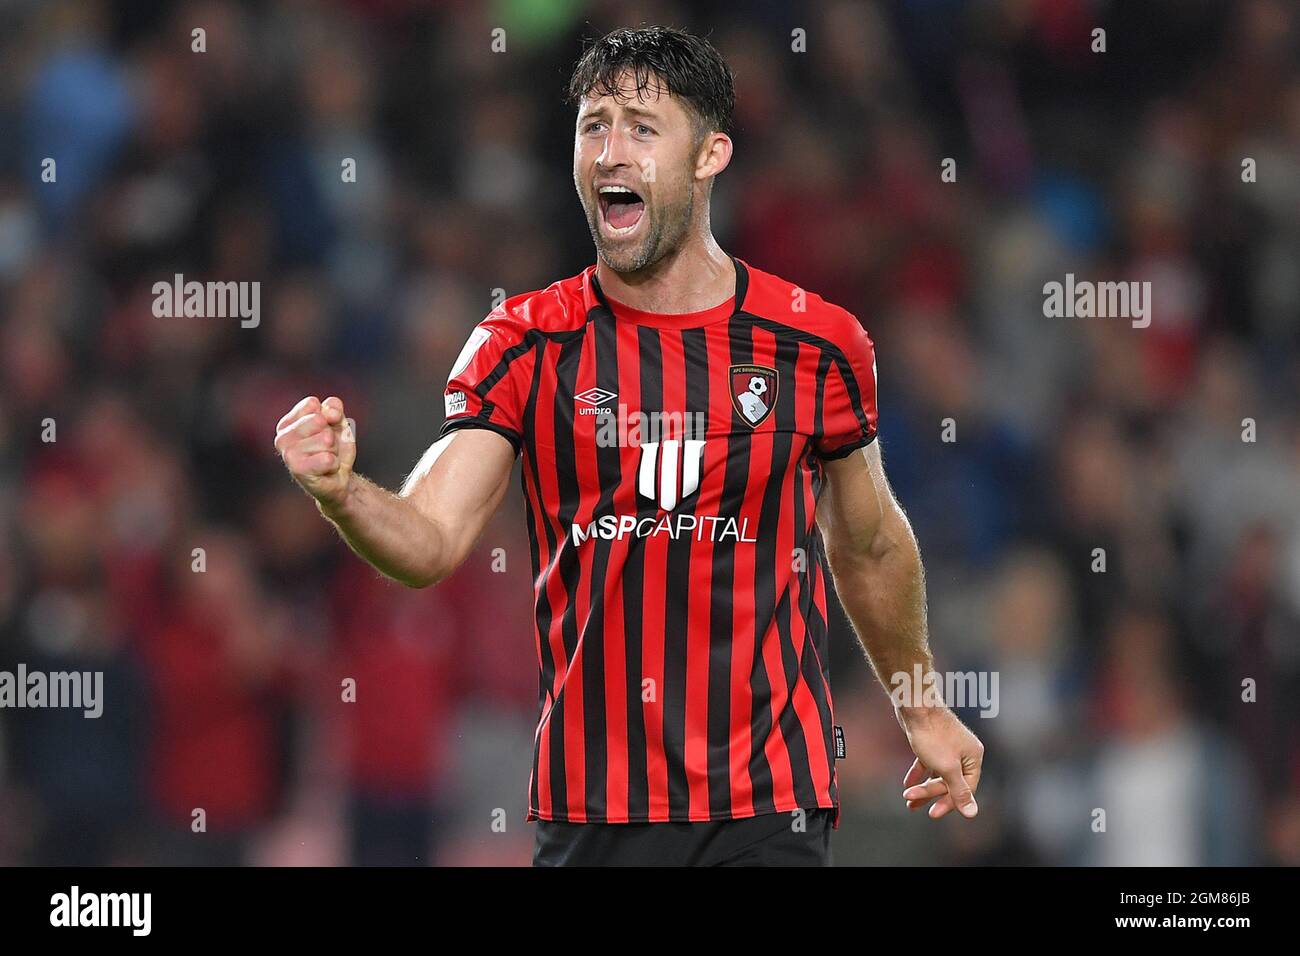 Gary Cahill of AFC Bournemouth celebrates at full time - AFC Bournemouth v Queens Park Rangers, Sky Bet Championship, Vitality Stadium, Bournemouth, UK - 14th September 2021  Editorial Use Only - DataCo restrictions apply Stock Photo